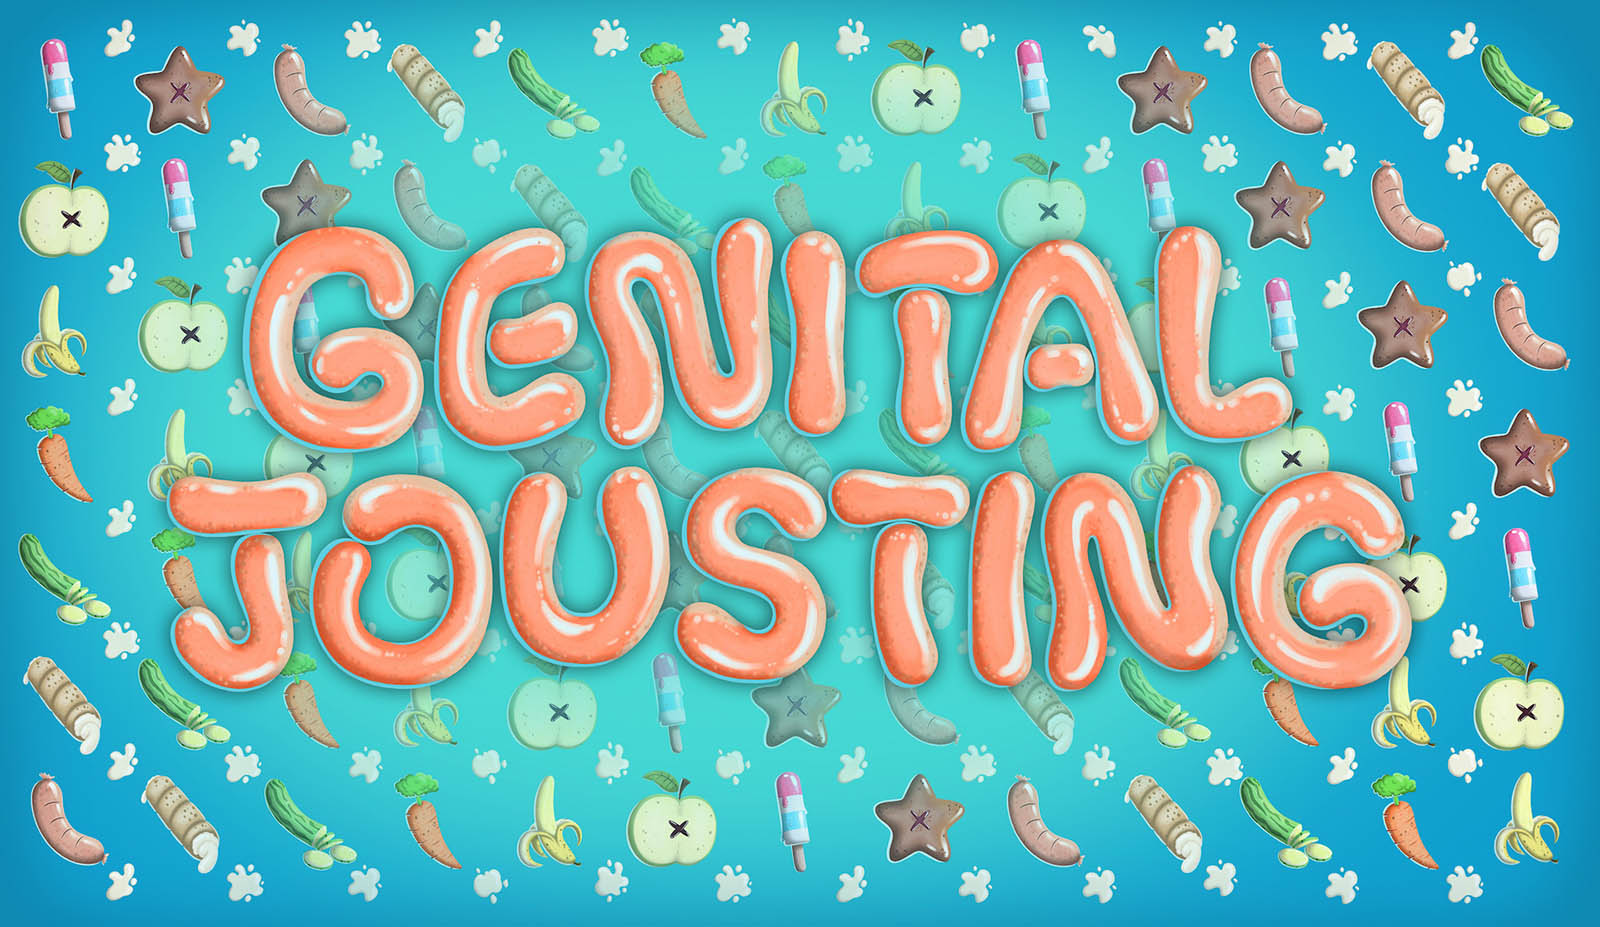 Genital Jousting Brings A New Level Of Silliness To Steam